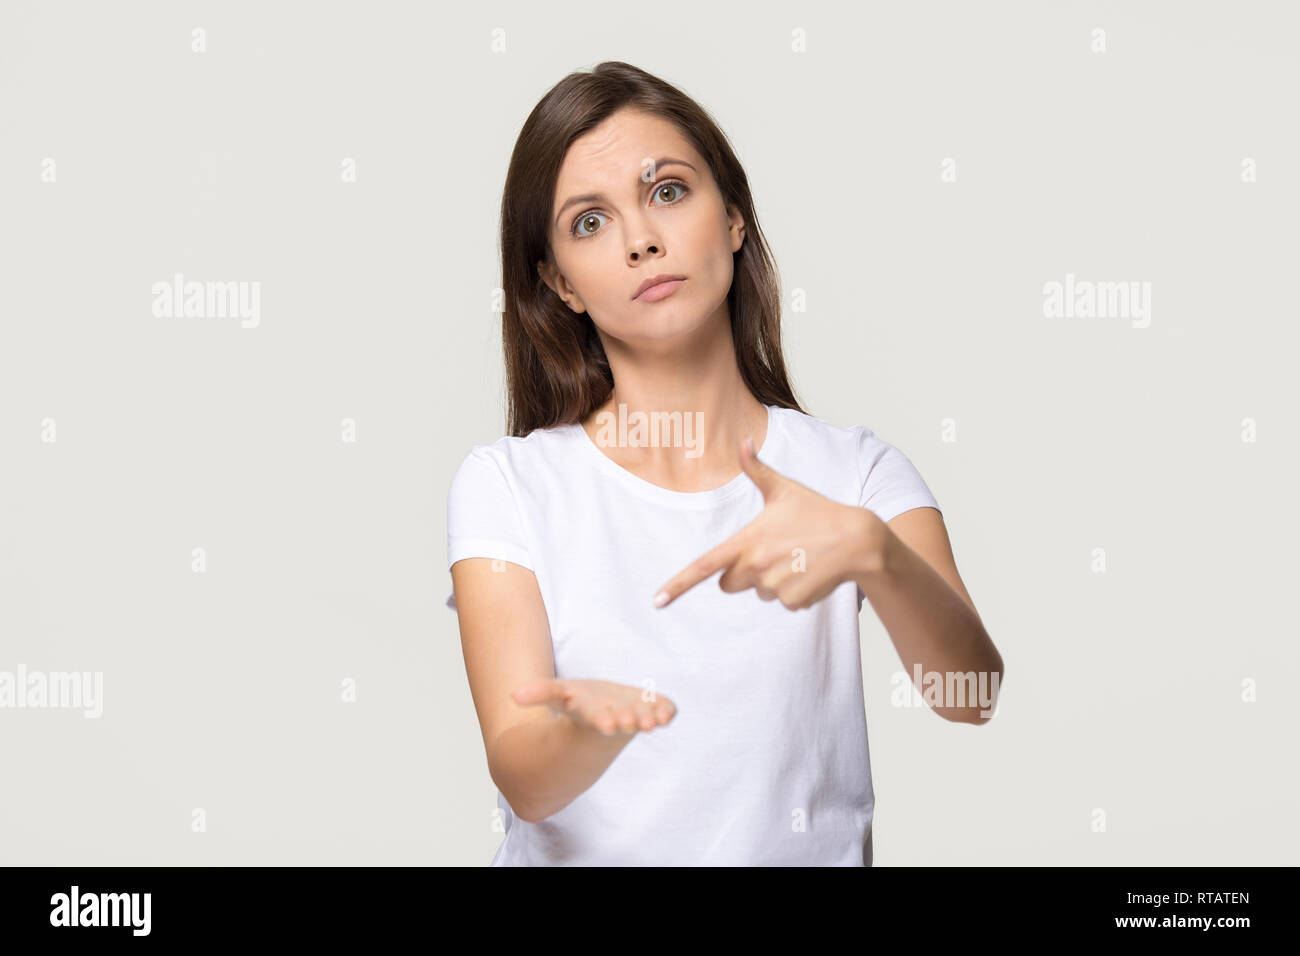 Annoyed girl pointing at copy space isolated on grey background Stock Photo